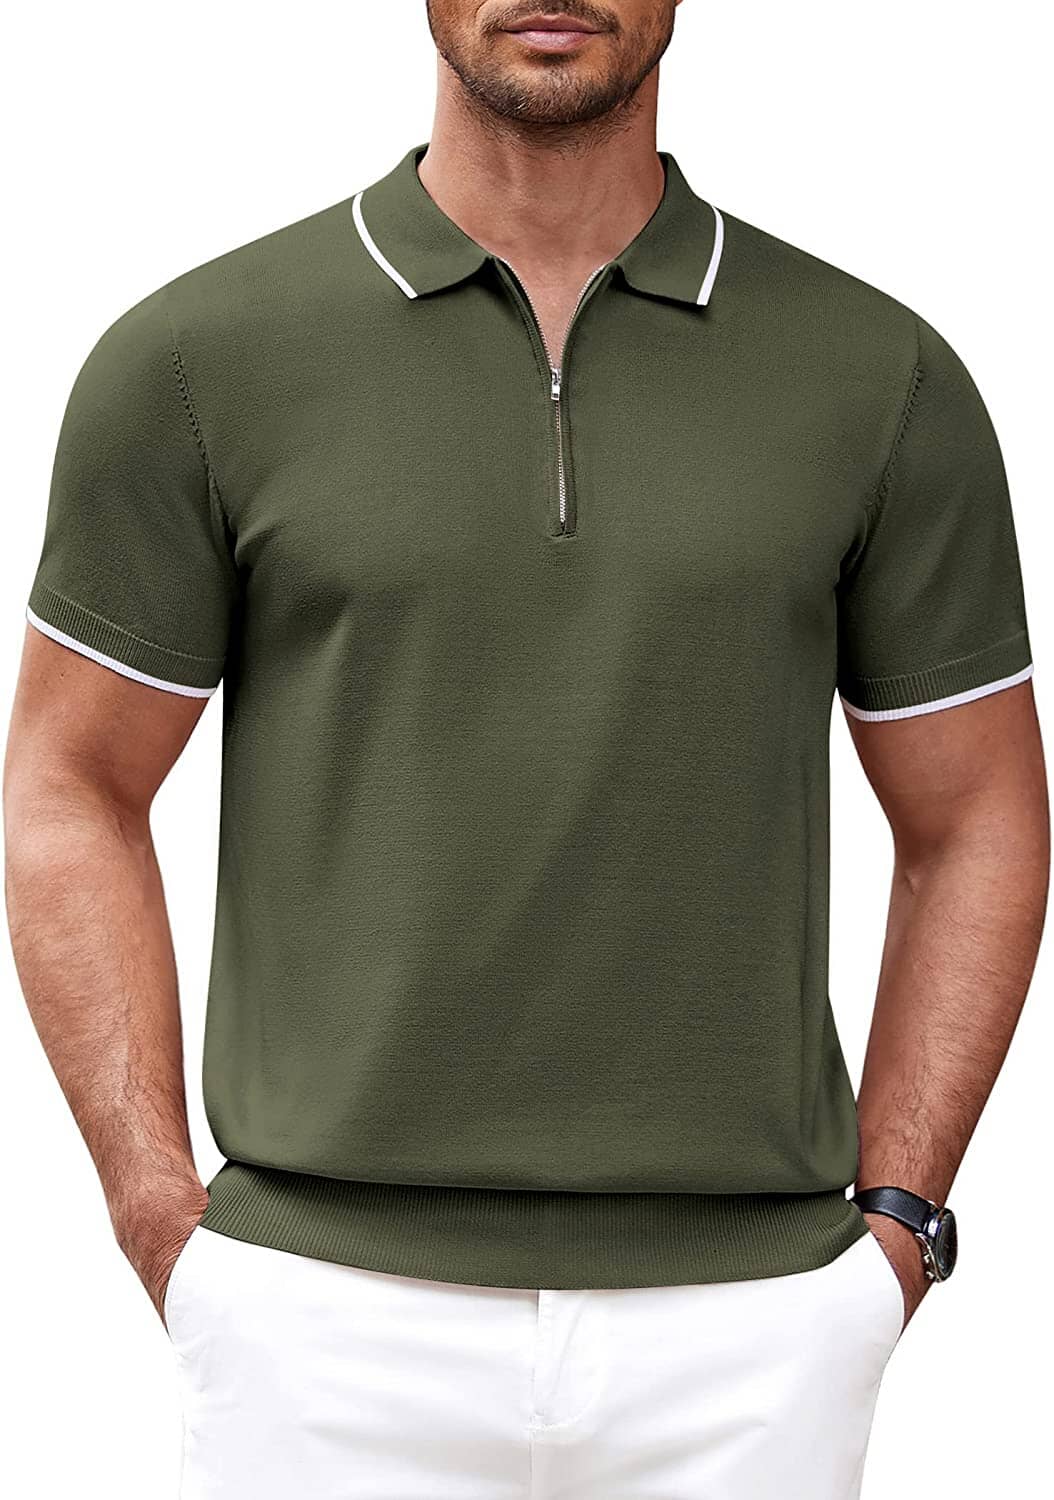 Classic Zipper Short Sleeve Polo Shirt (US Only) Polos COOFANDY Store Army Green S 